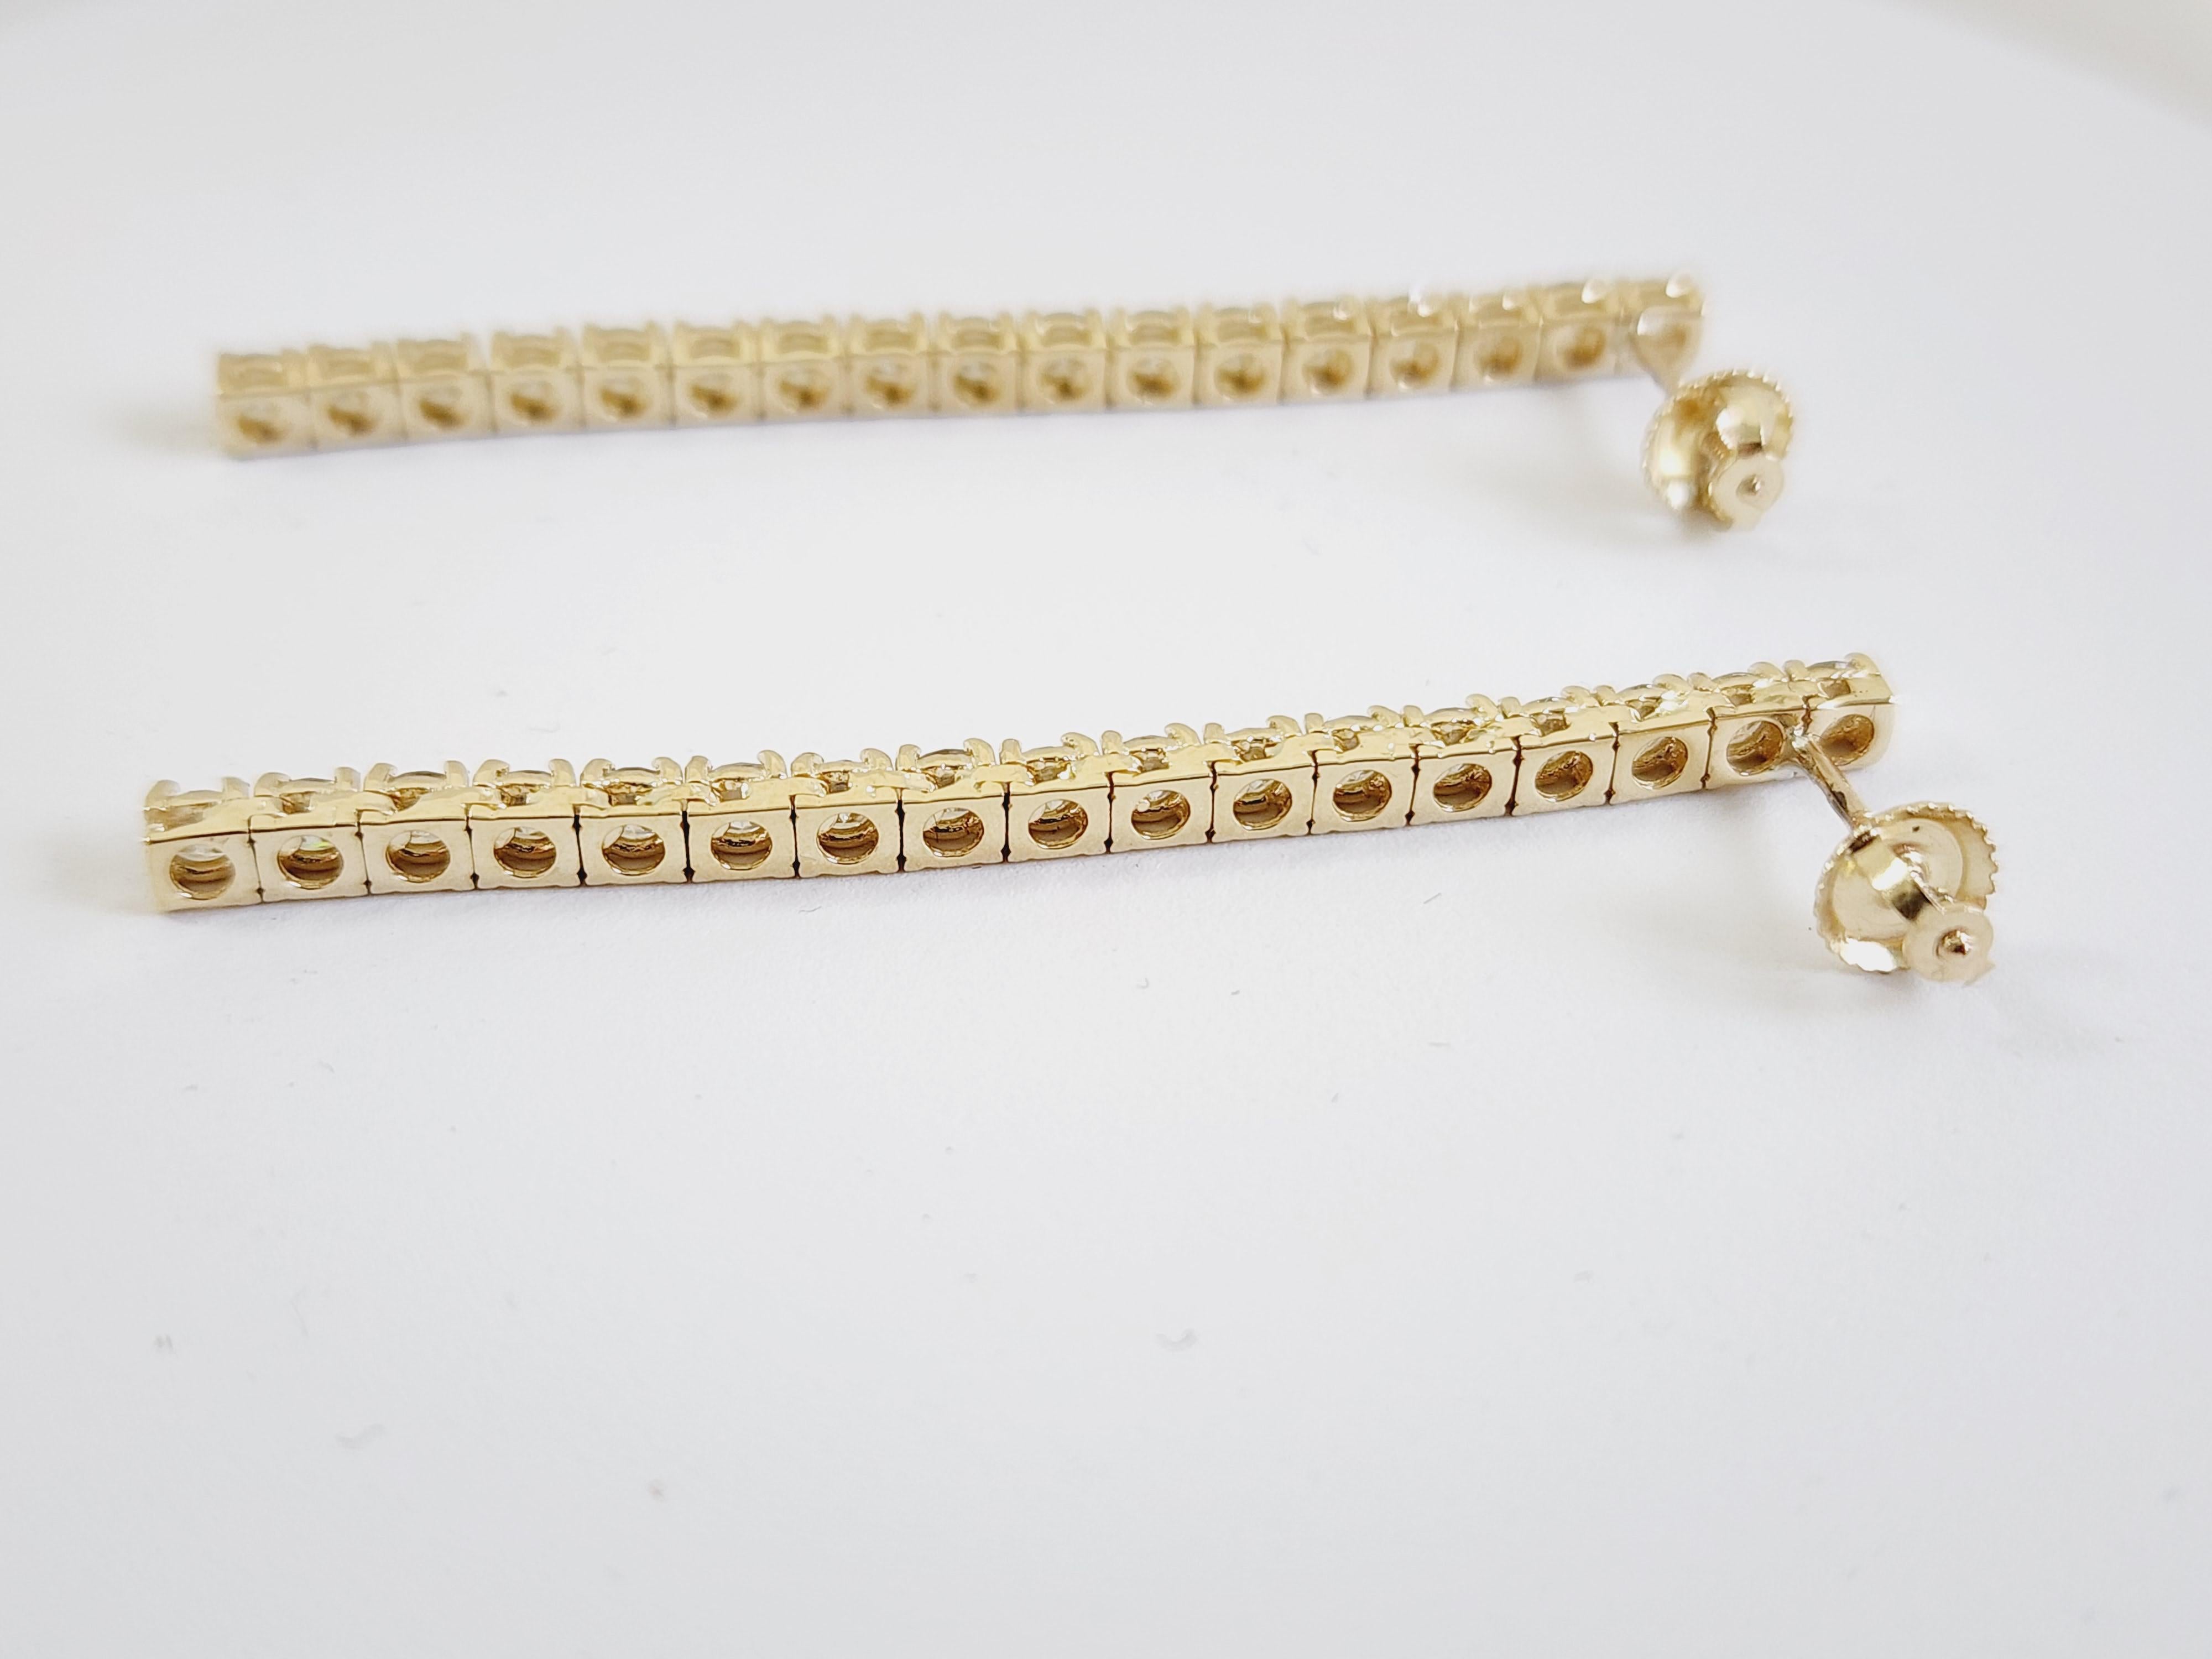 Tennis Earrings Italian made 14K yellow gold.
The total weight is 3.10 carats. Beautiful shiny natural diamonds.
The total length is 2 inch drop. screw back setting for secure wear.

*Free shipping within U.S*